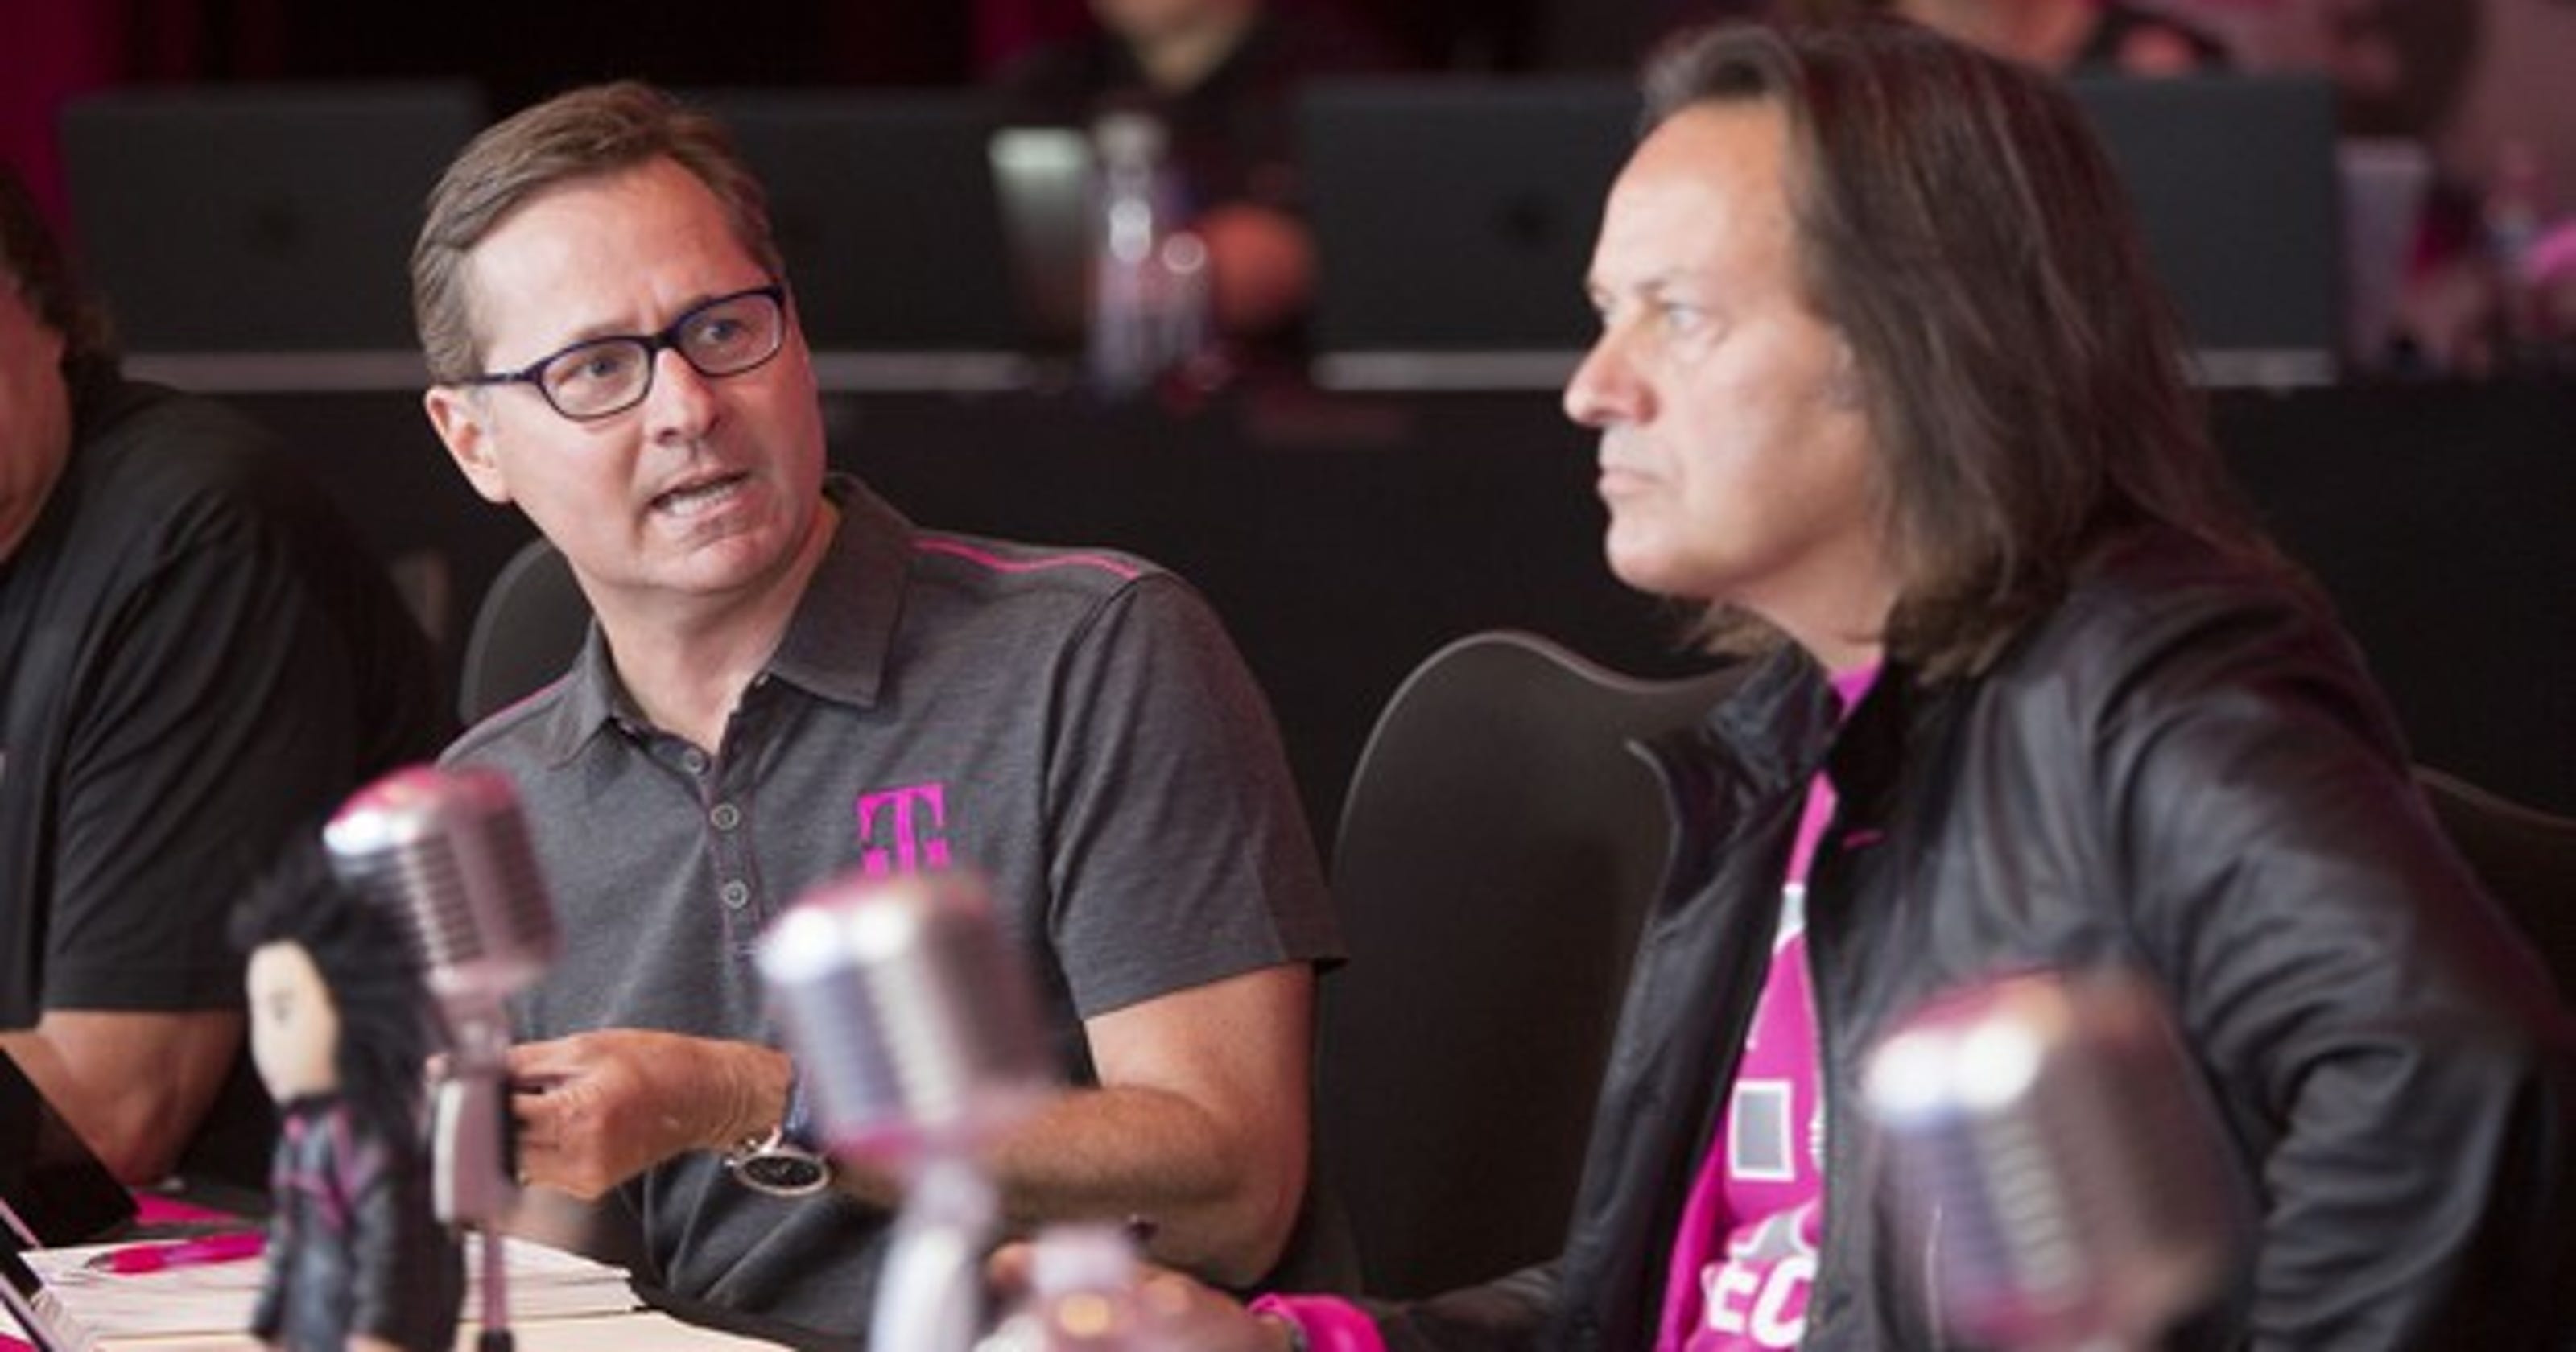 T-Mobile aims to take on cable companies in latest Sprint merger pitch